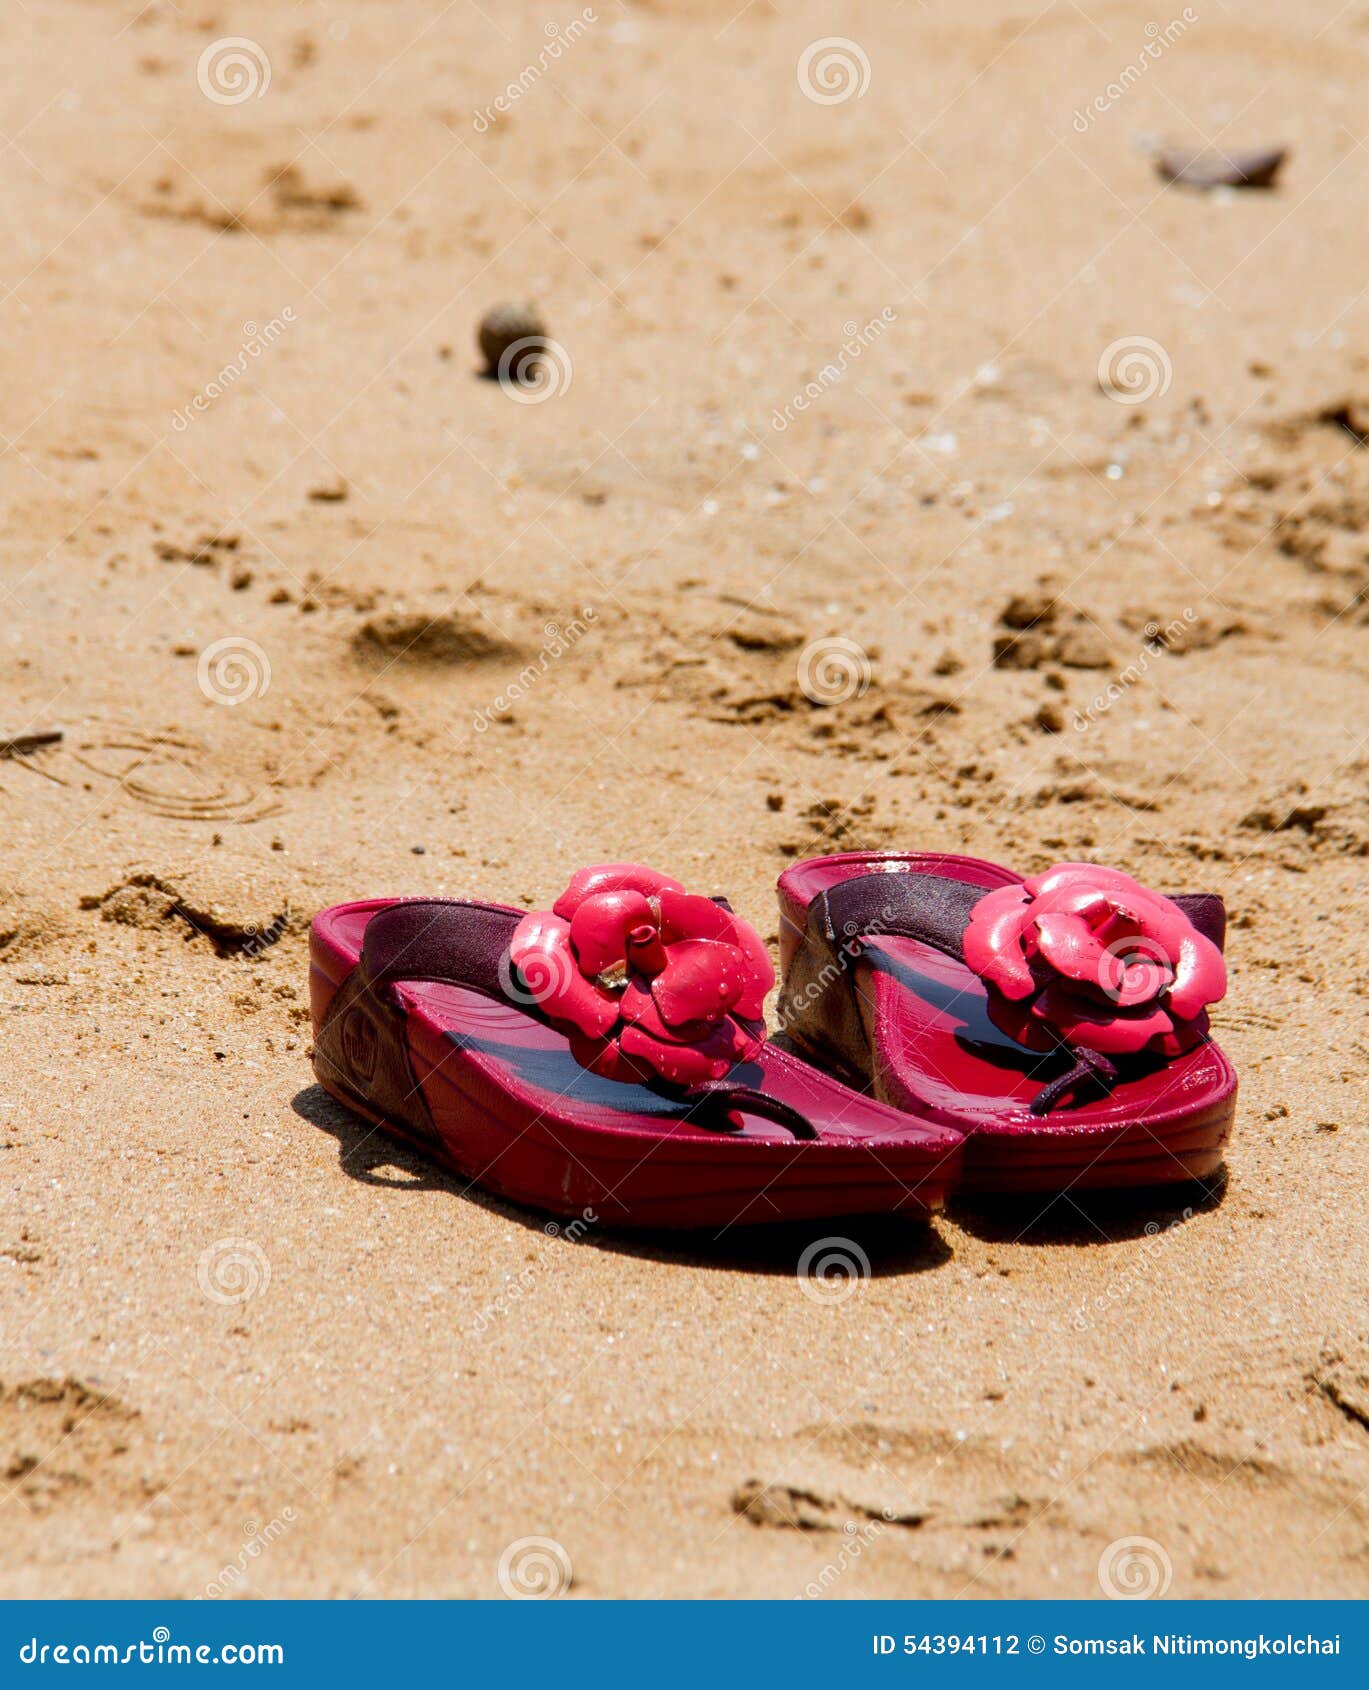 Red shoes on the beach stock photo. Image of shoes, aviv - 54394112